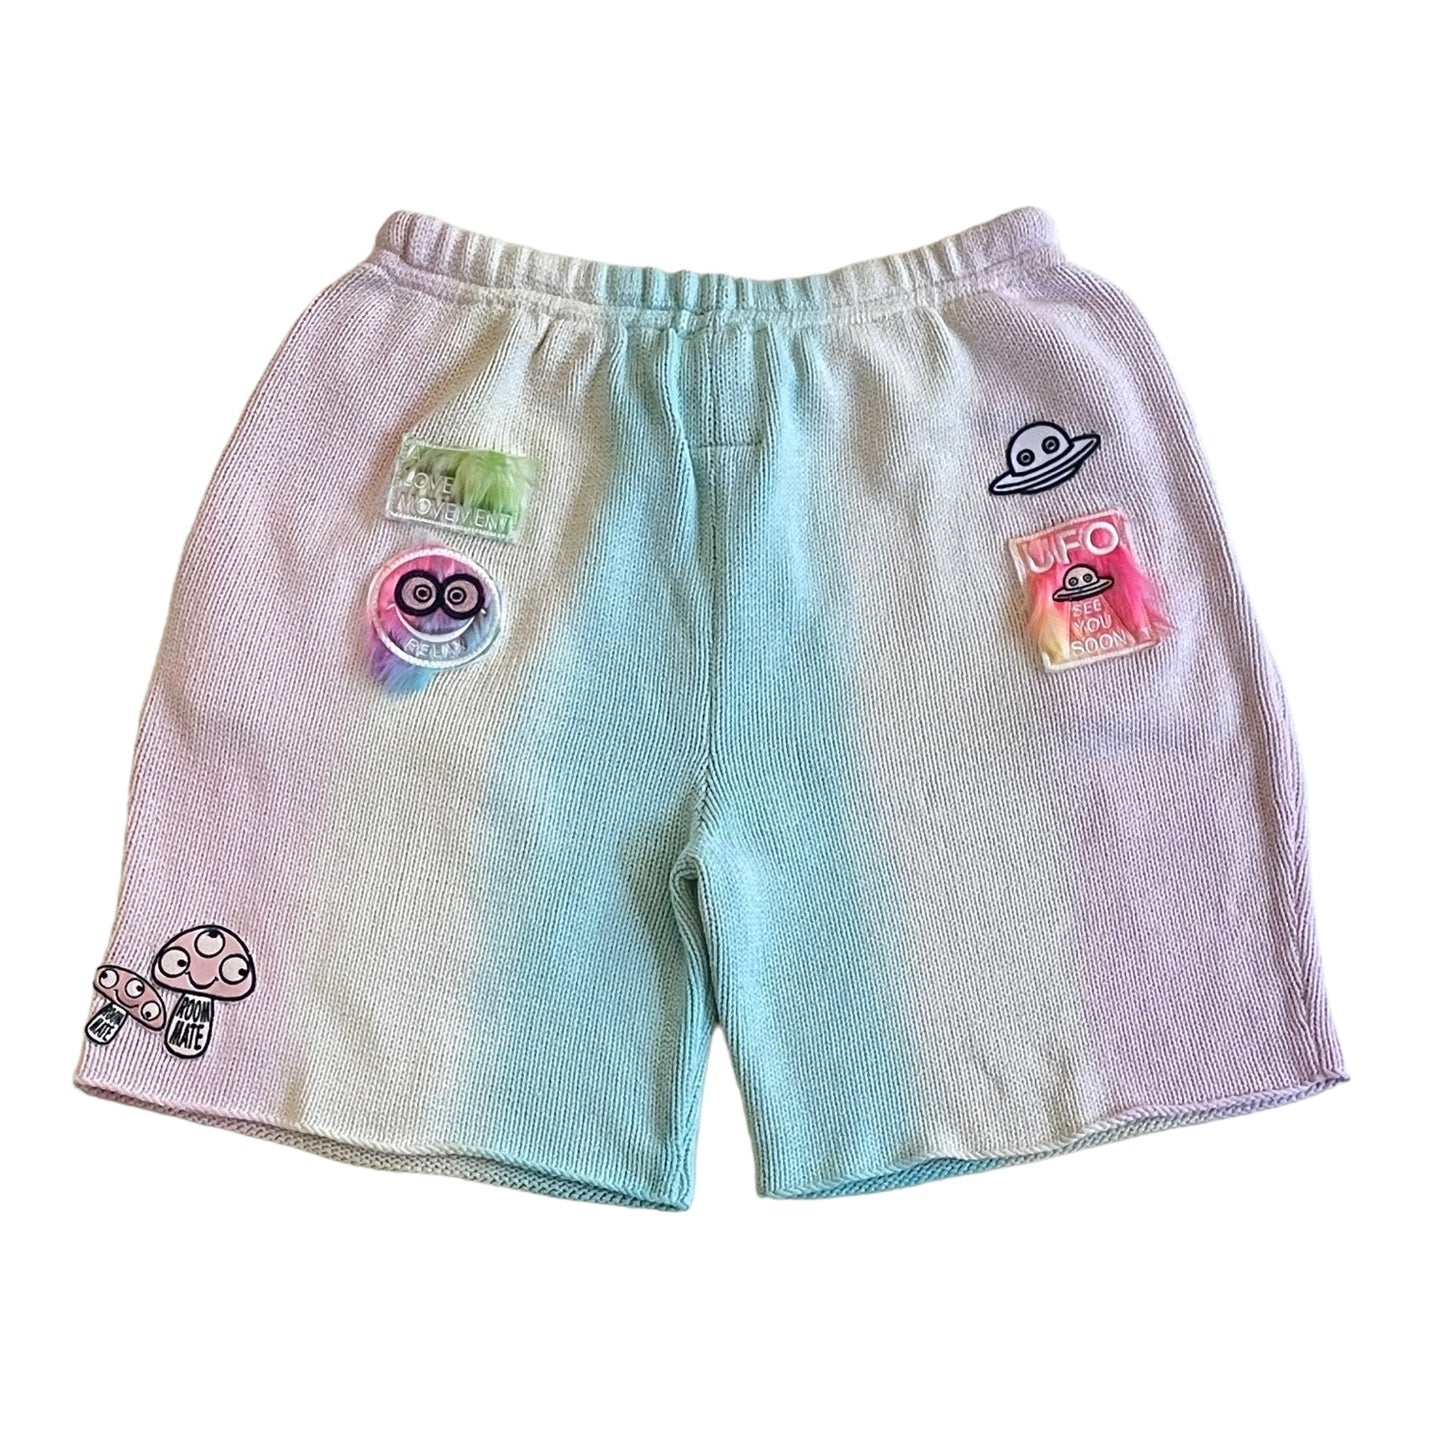 Camp High Recycled Knit Shorts